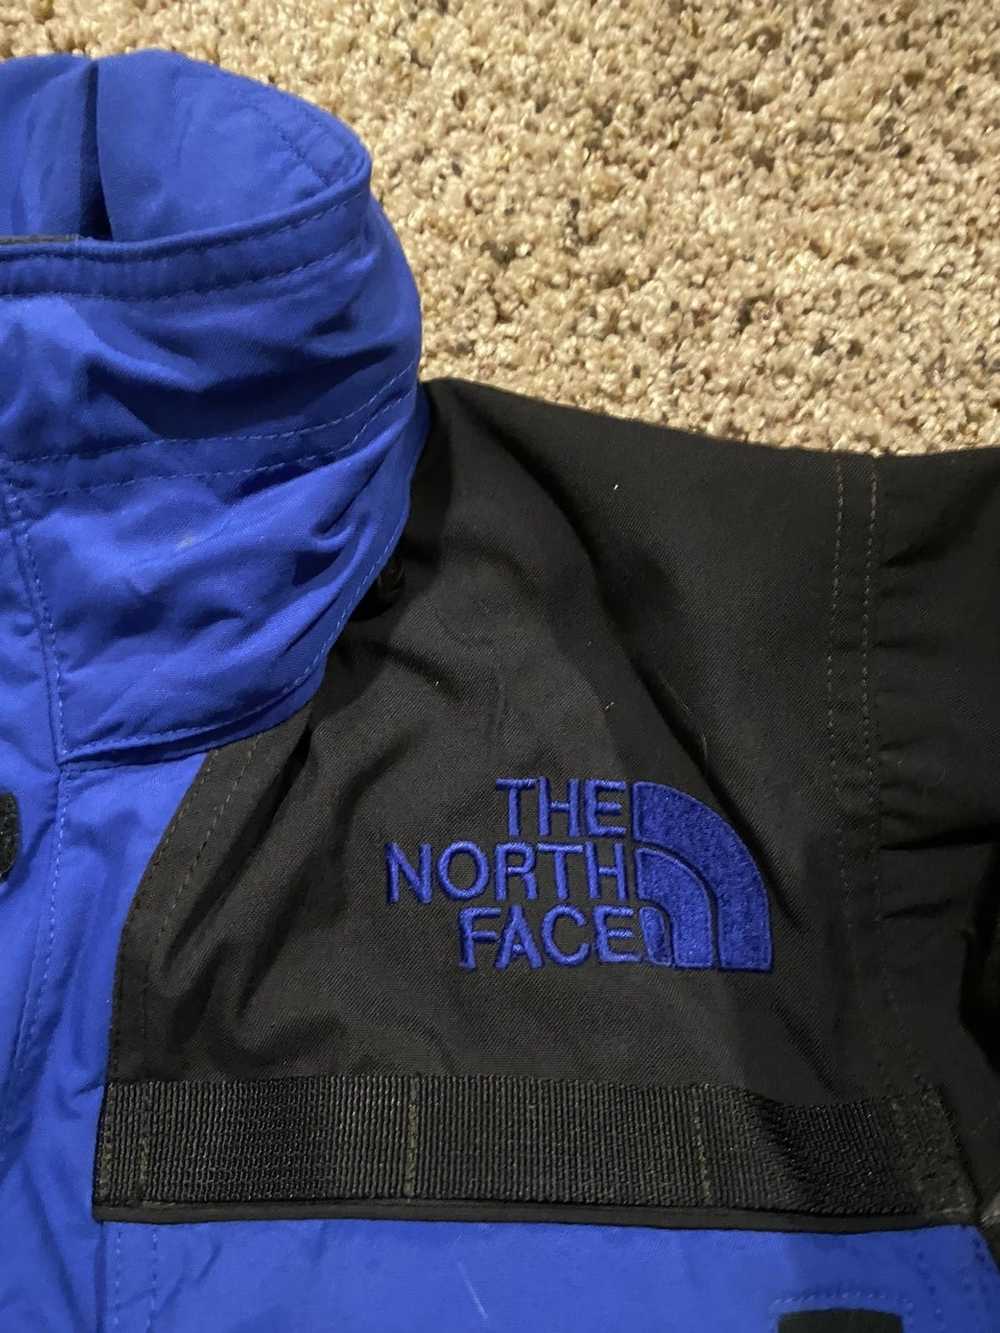 The North Face × Vintage North face jacket - image 3